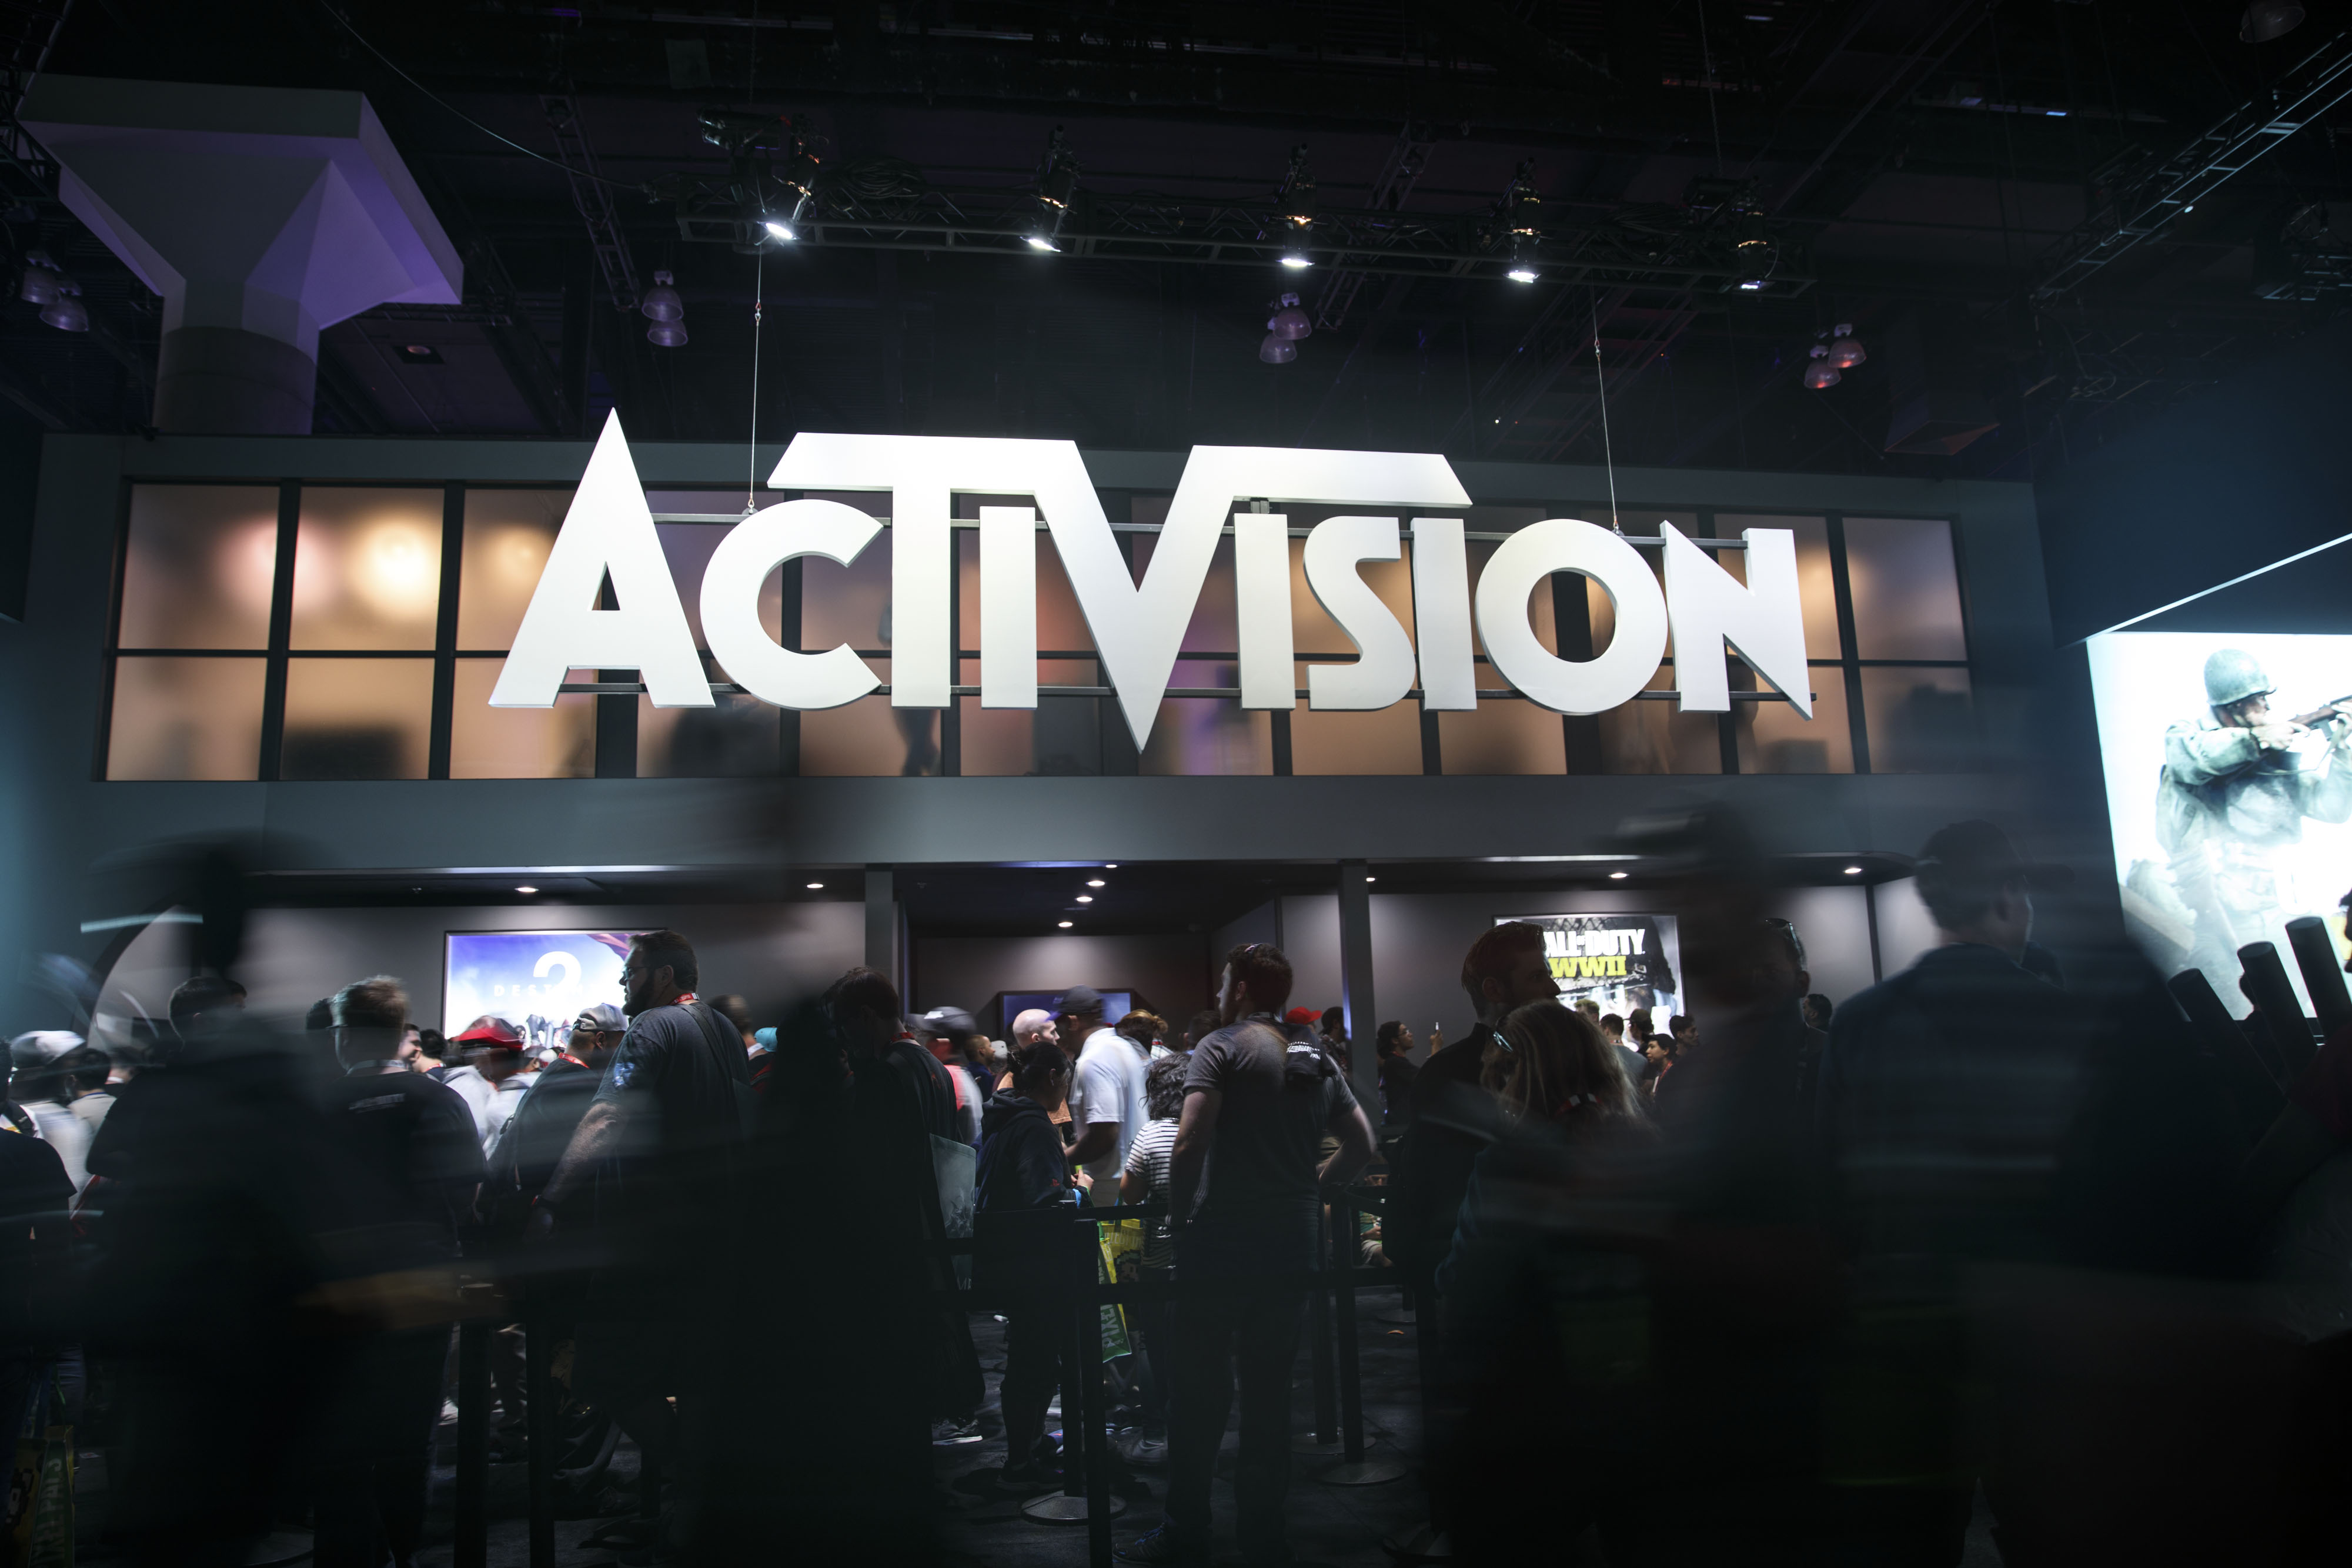 Microsoft closes Activision Blizzard deal after regulatory review